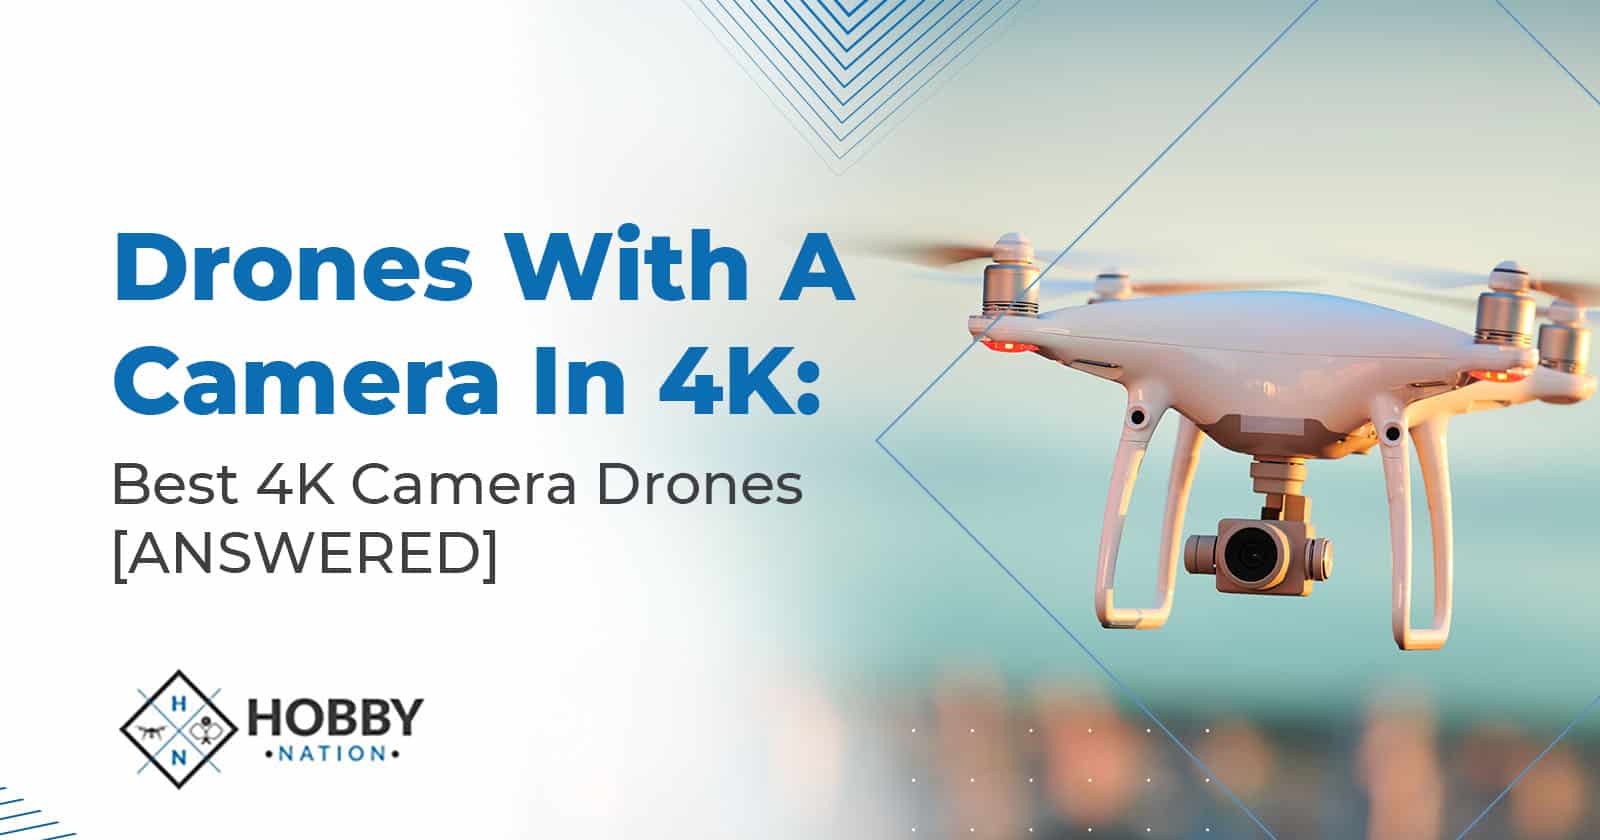 Drones With A Camera In 4K: Best 4K Camera Drones